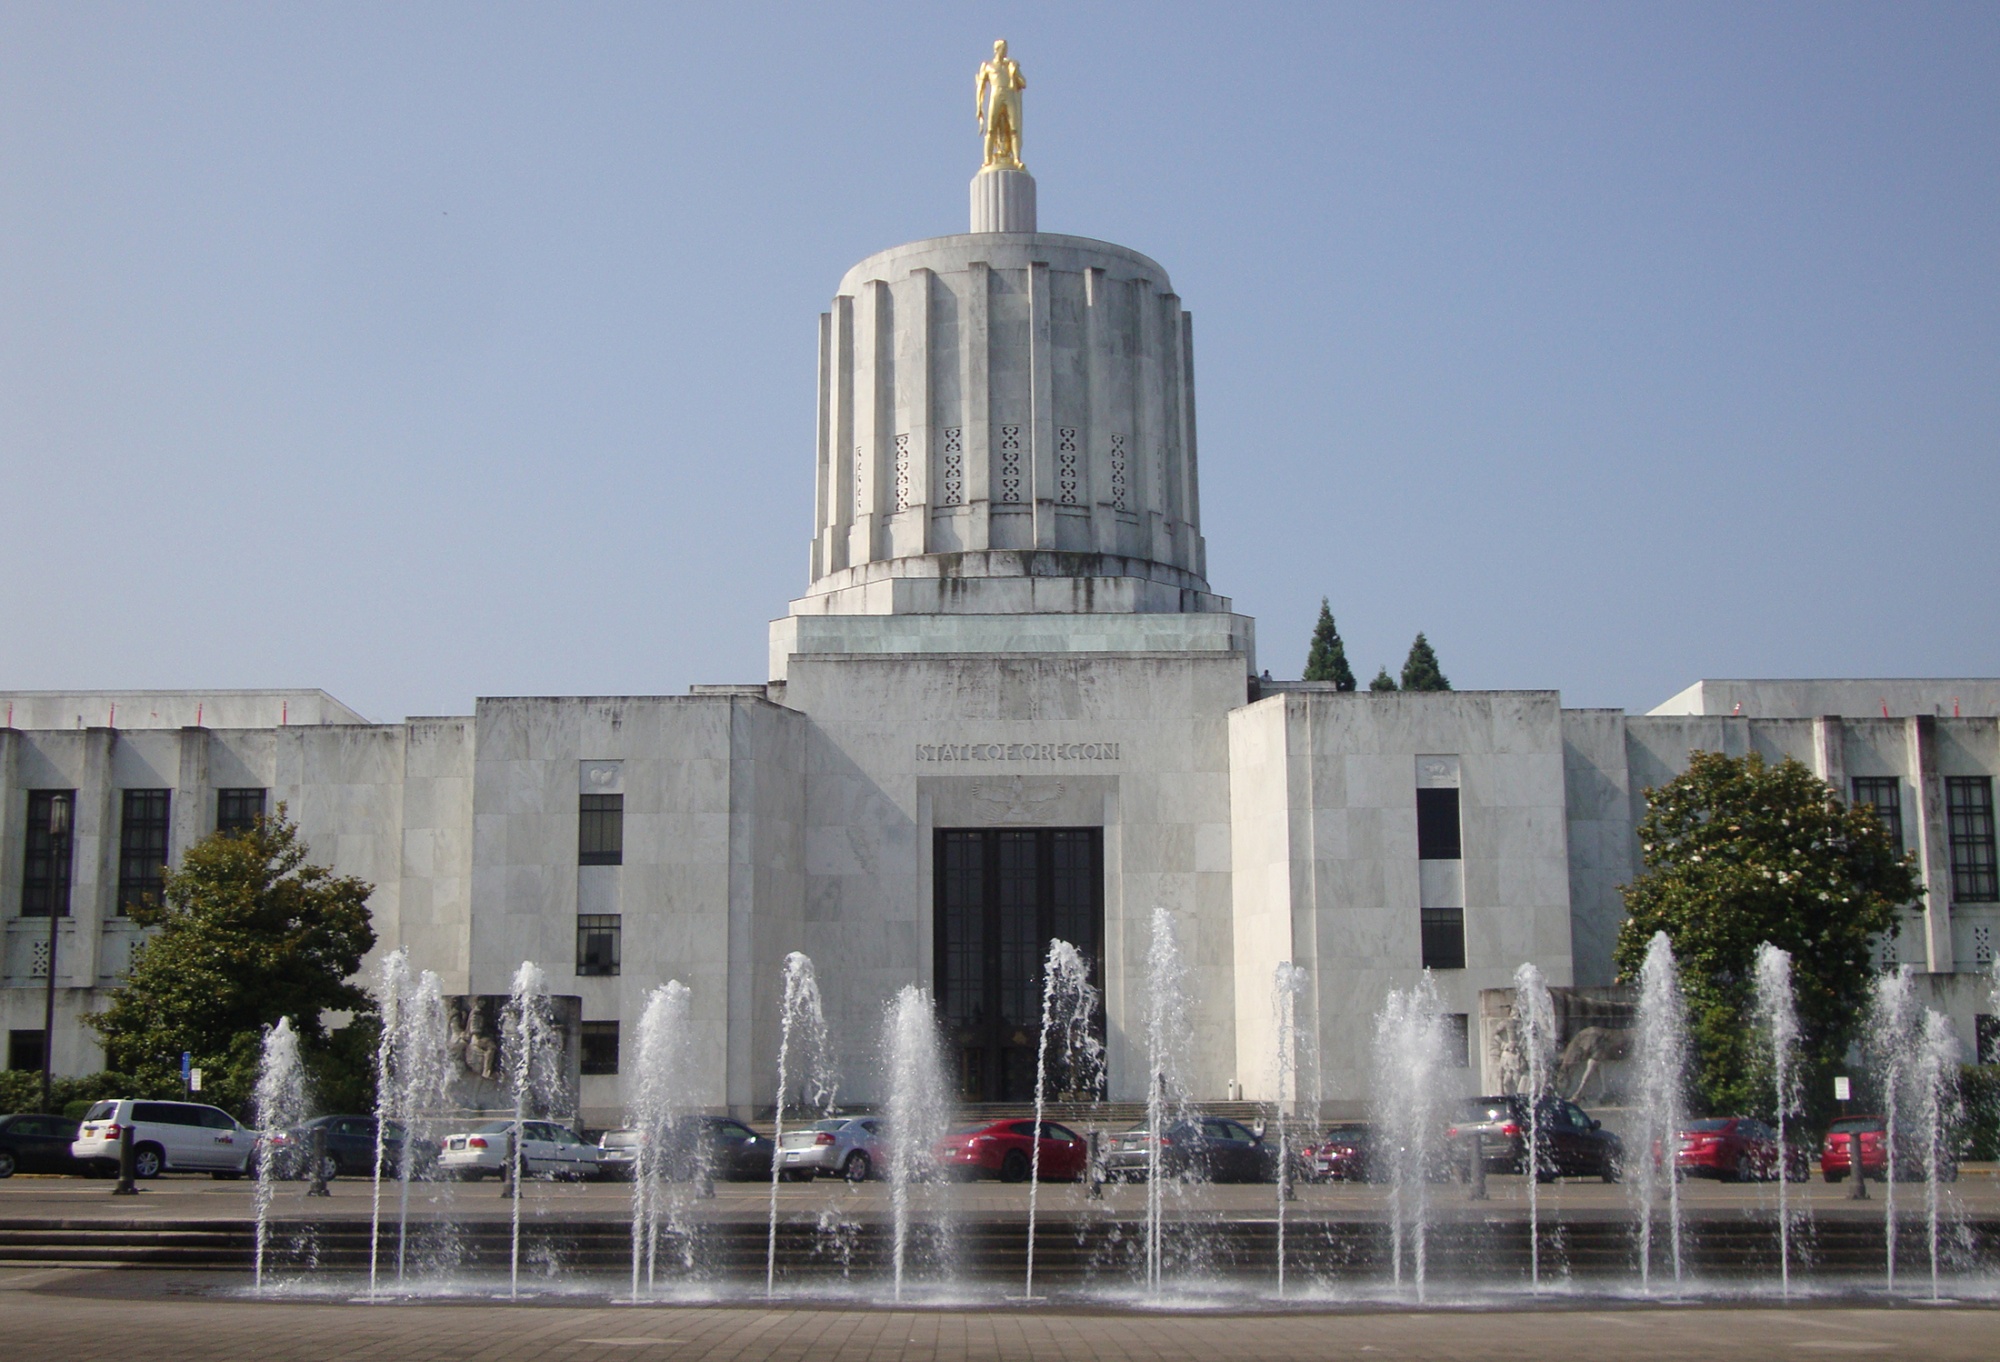 The Oregon State Capitol Building